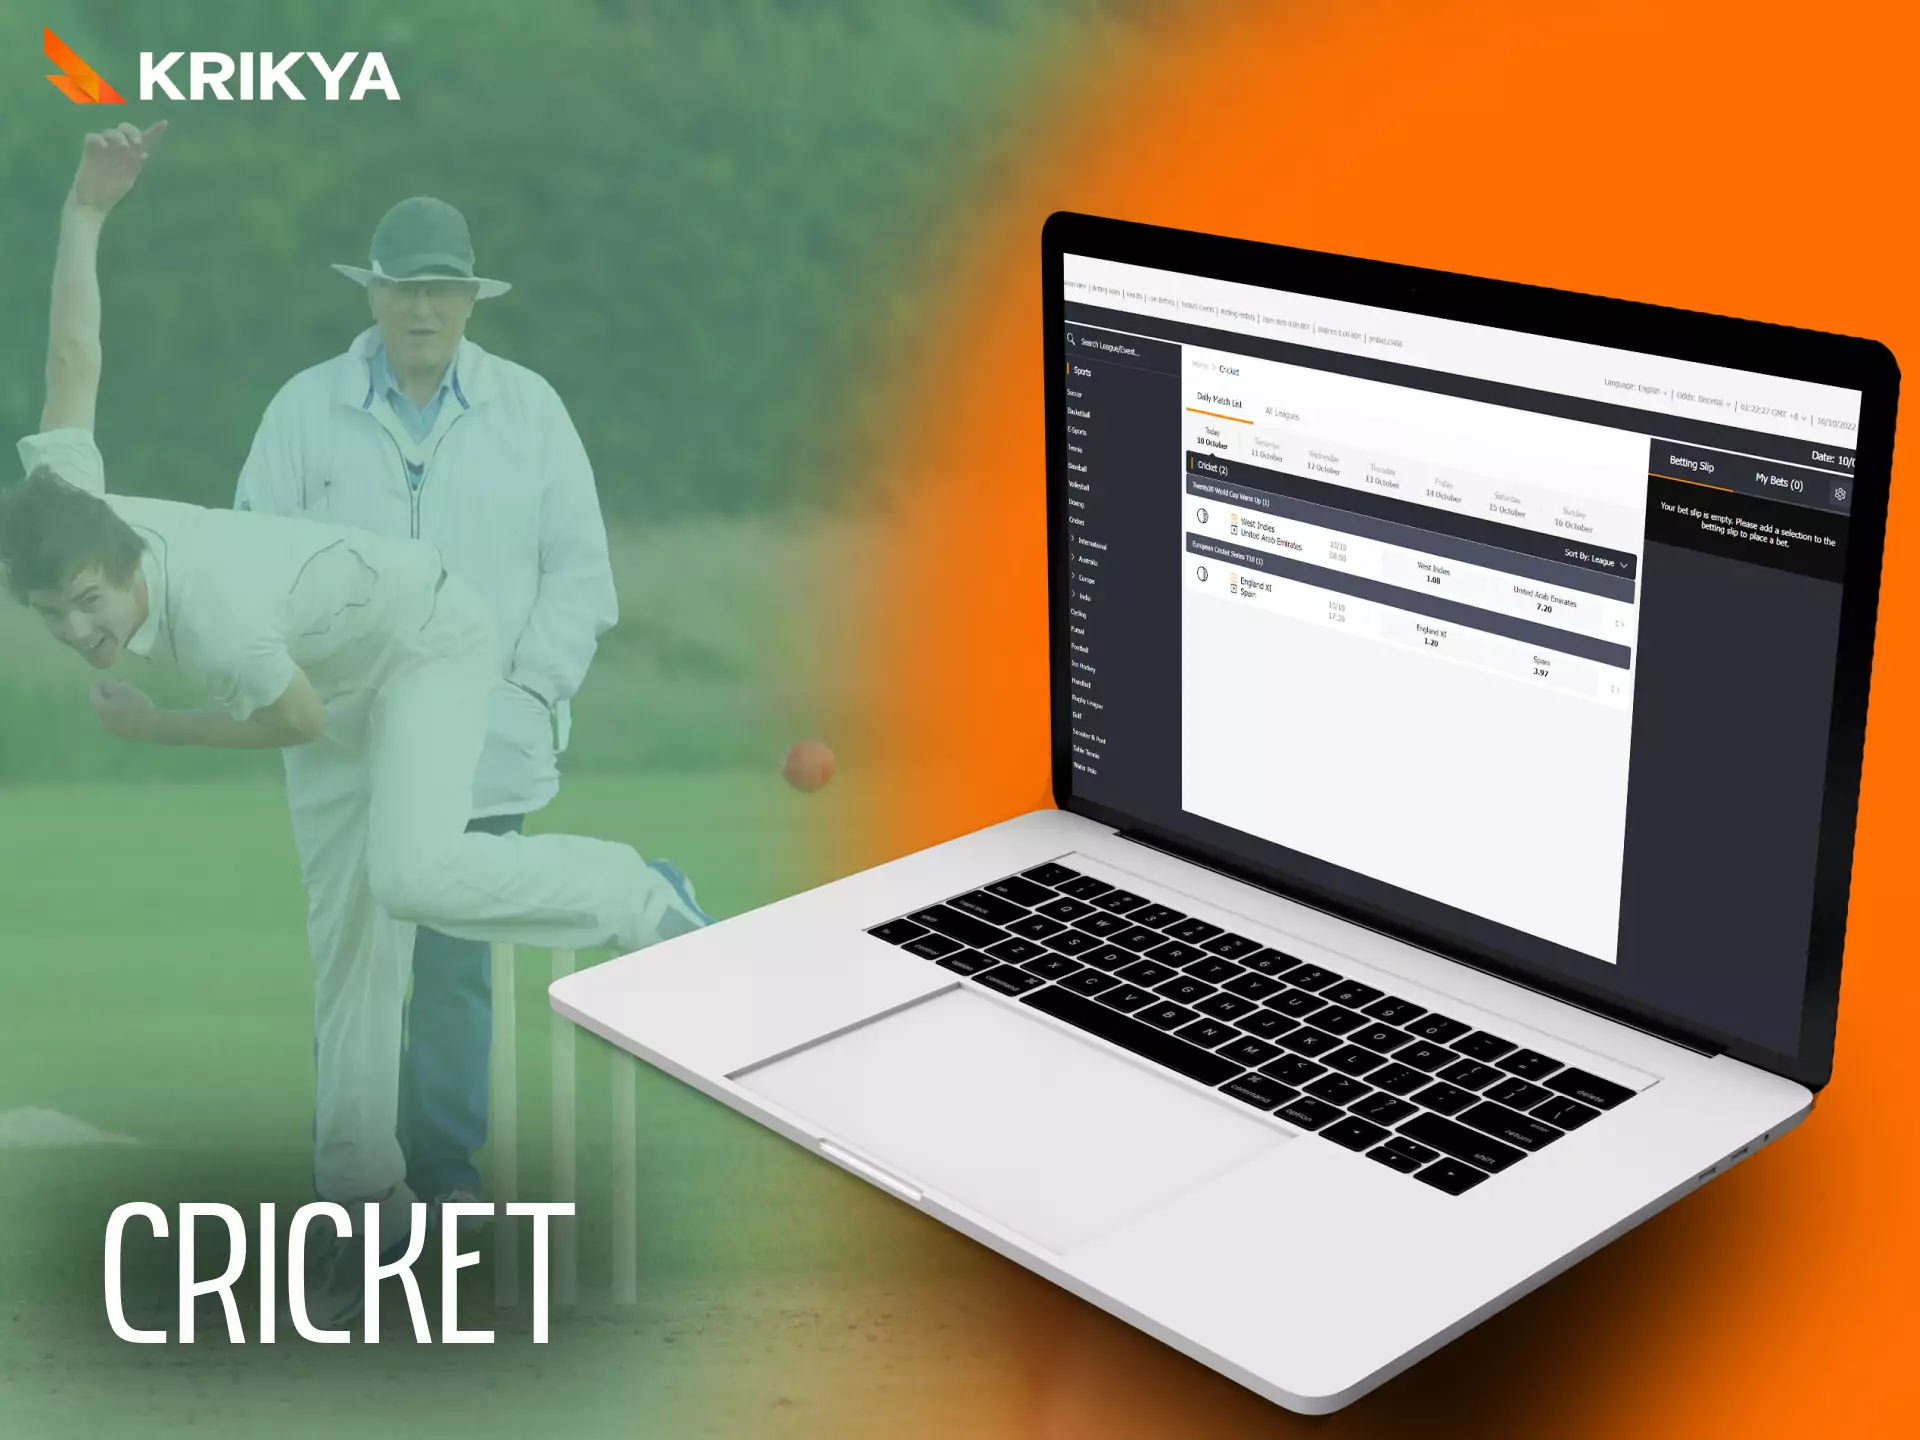 Krikya offers betting on cricket sports events.